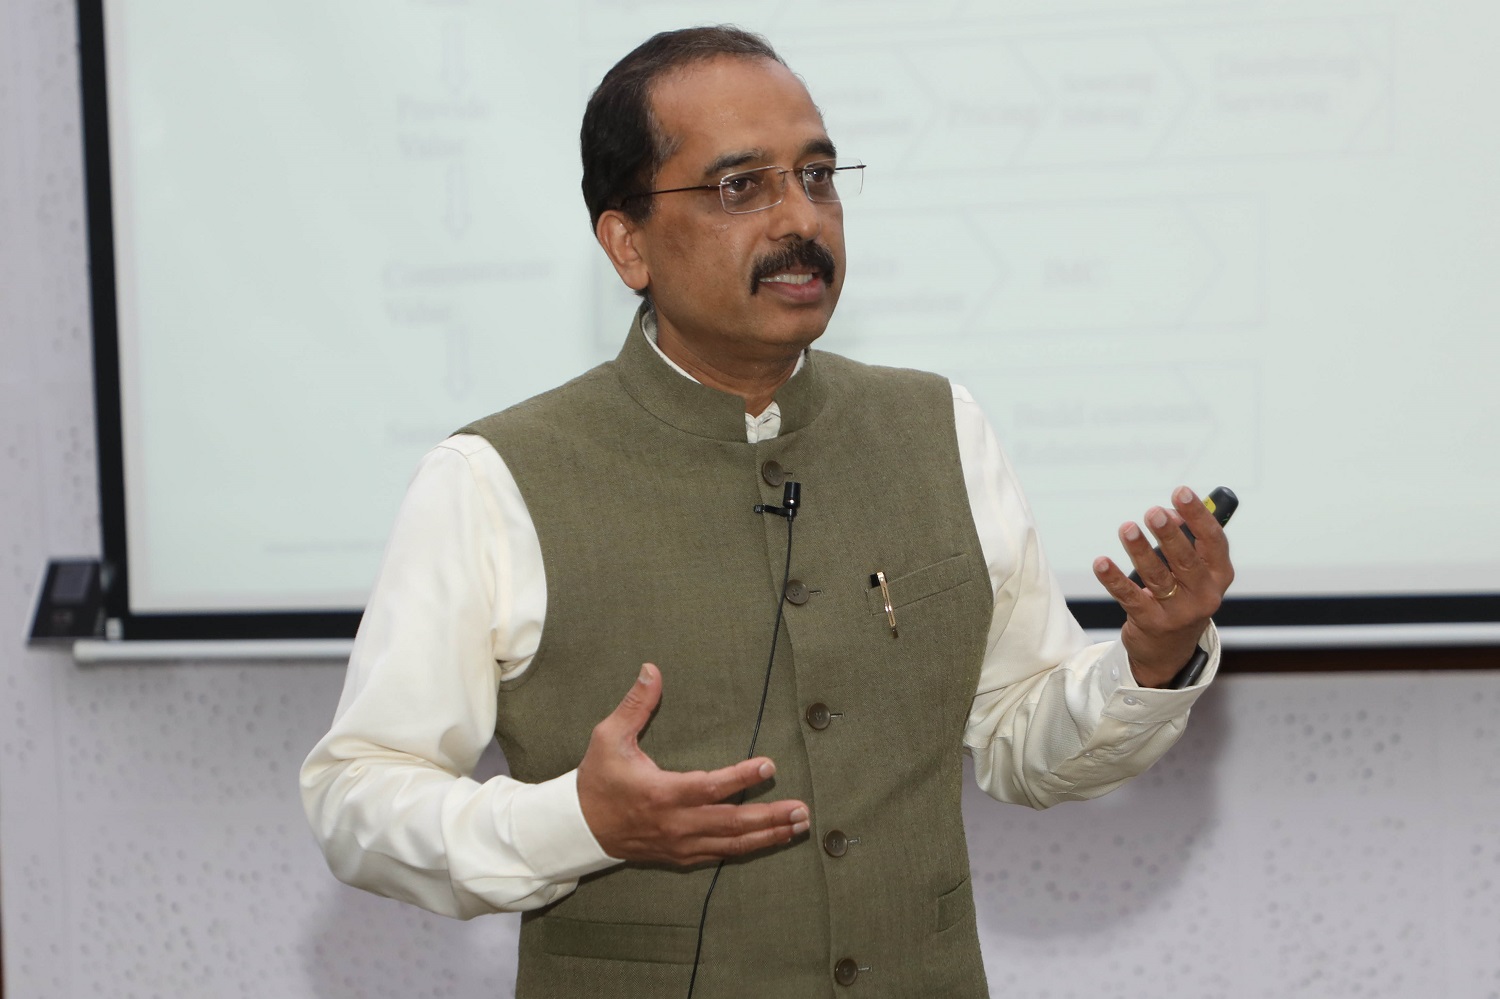 Prof. G Shainesh of the Marketing area of IIMB, conducts a session on: ‘Leveraging Digital to Create and Capture Value’.